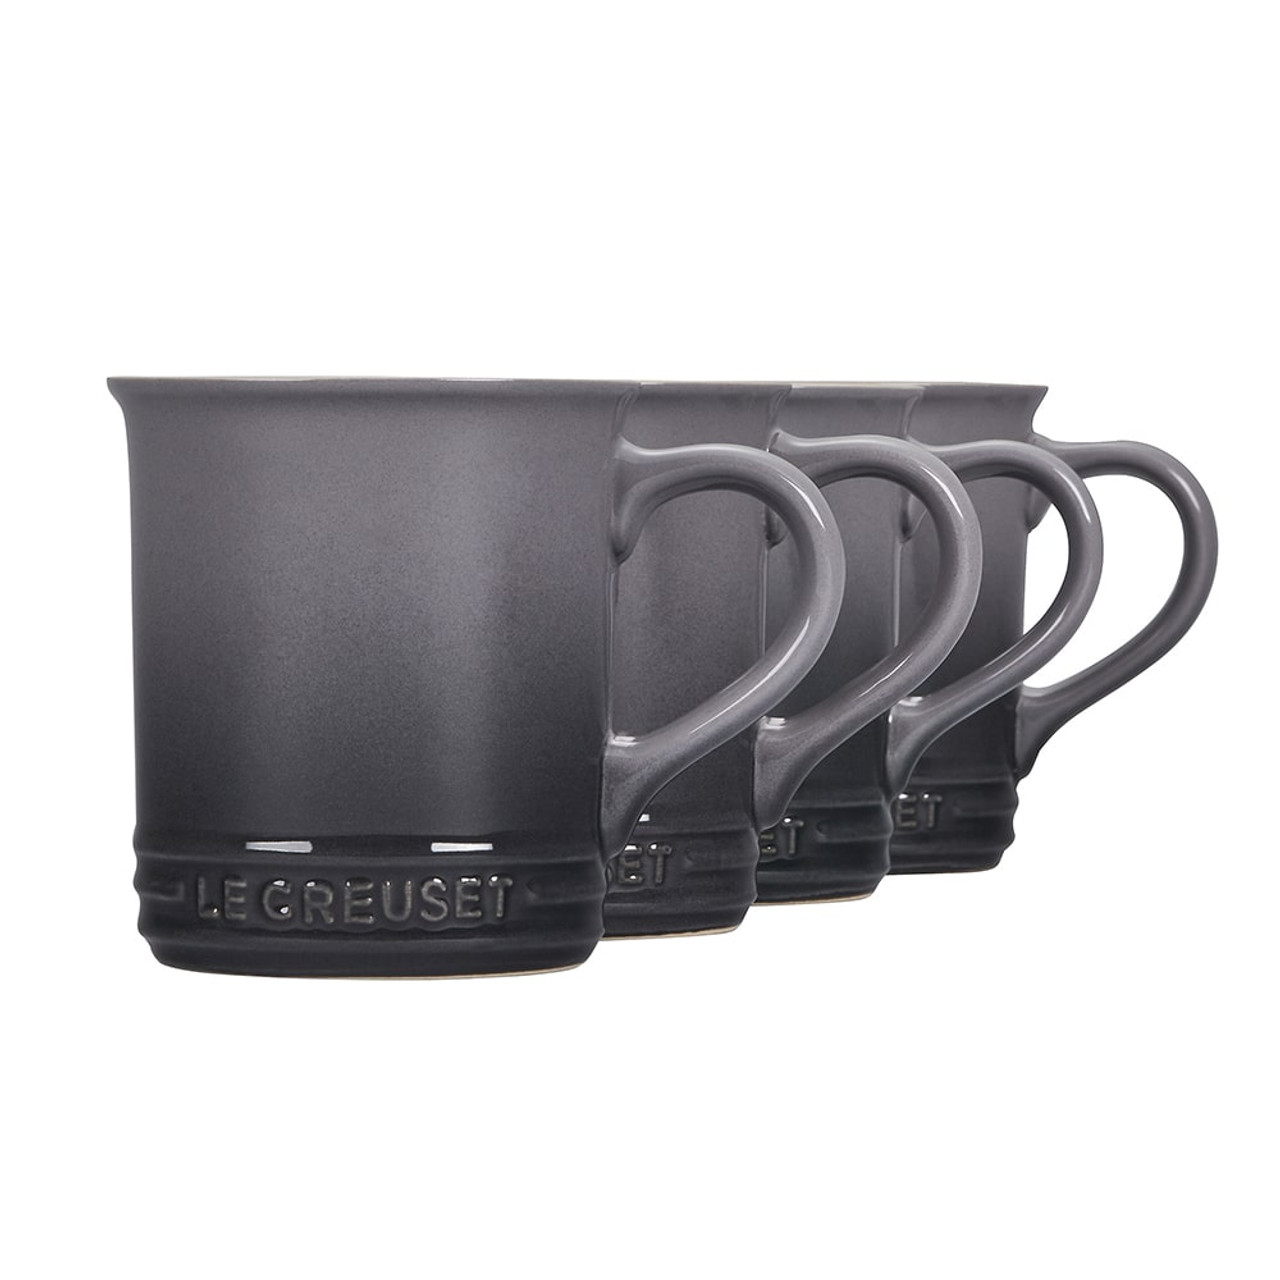 https://cdn11.bigcommerce.com/s-hccytny0od/images/stencil/1280x1280/products/3142/11186/le-creuset-mugs-oyster-1__94406.1580982884.jpg?c=2?imbypass=on